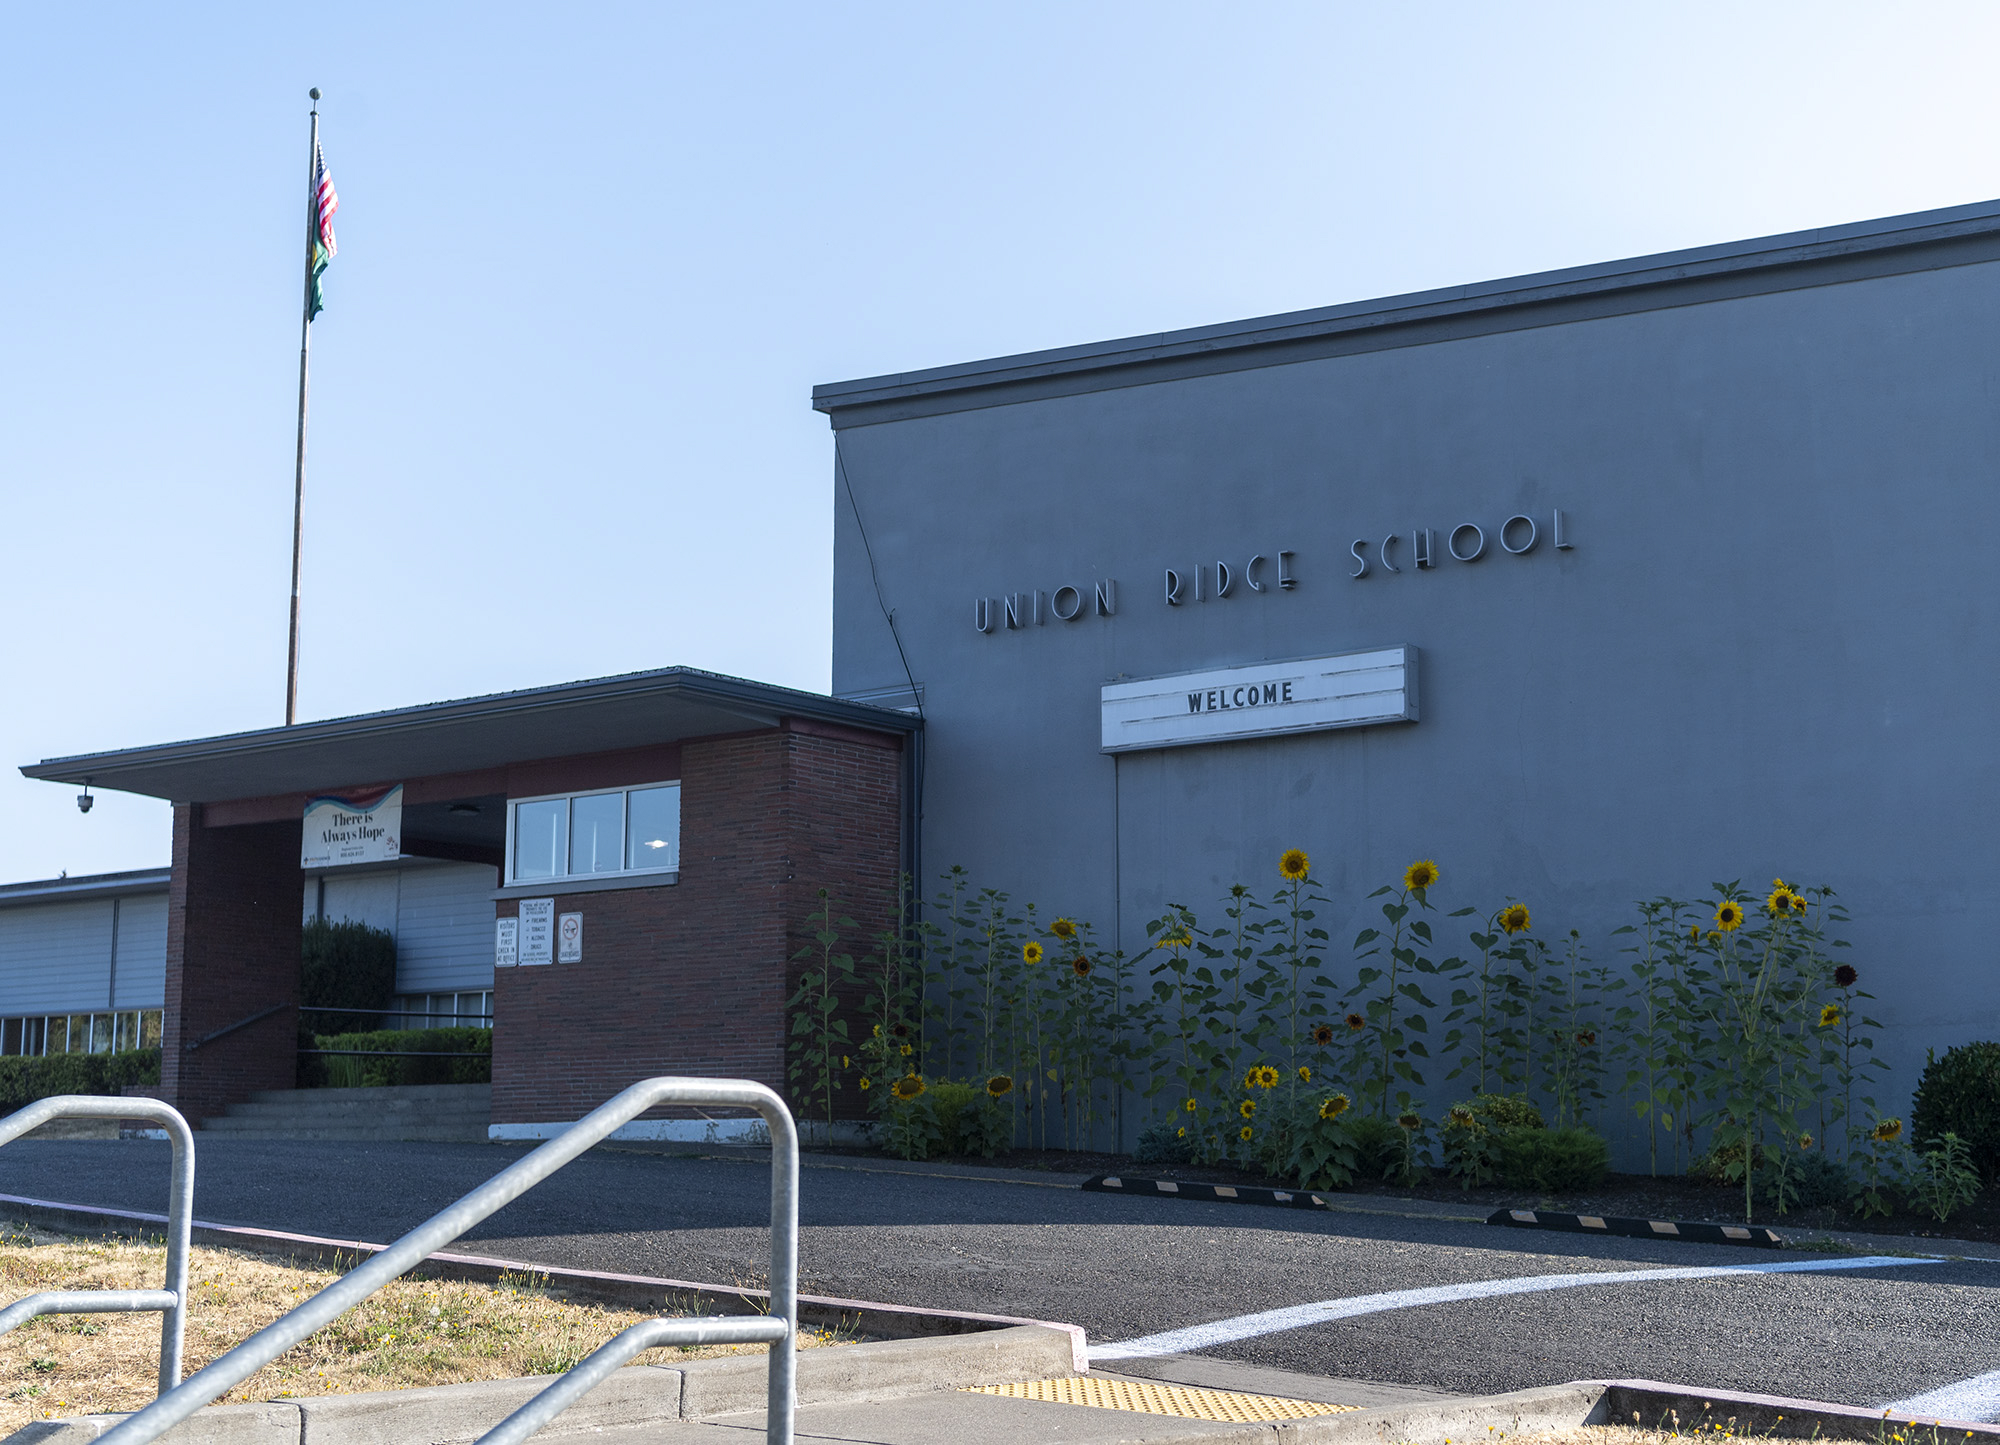 A sign welcomes students Monday, Sept. 19, 2022, at Union Ridge Elementary School in Ridgefield. Classes began after a tentative agreement was reached between the Ridgefield School district and the Ridgefield Education Association.